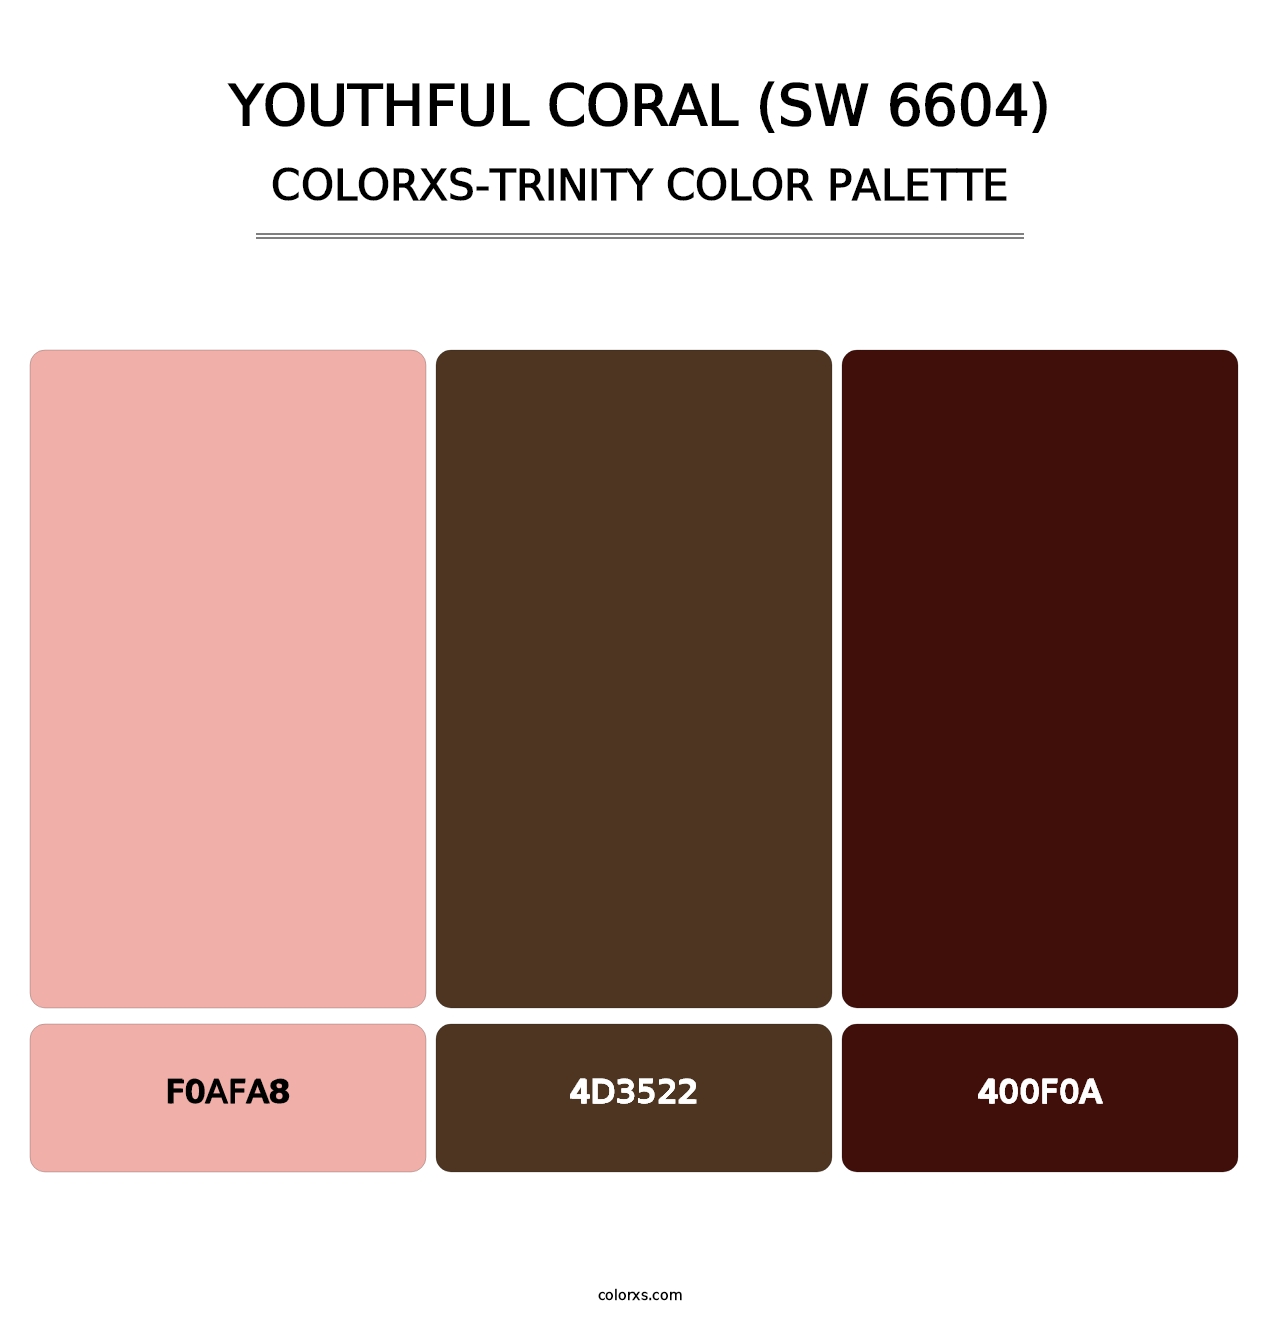 Youthful Coral (SW 6604) - Colorxs Trinity Palette